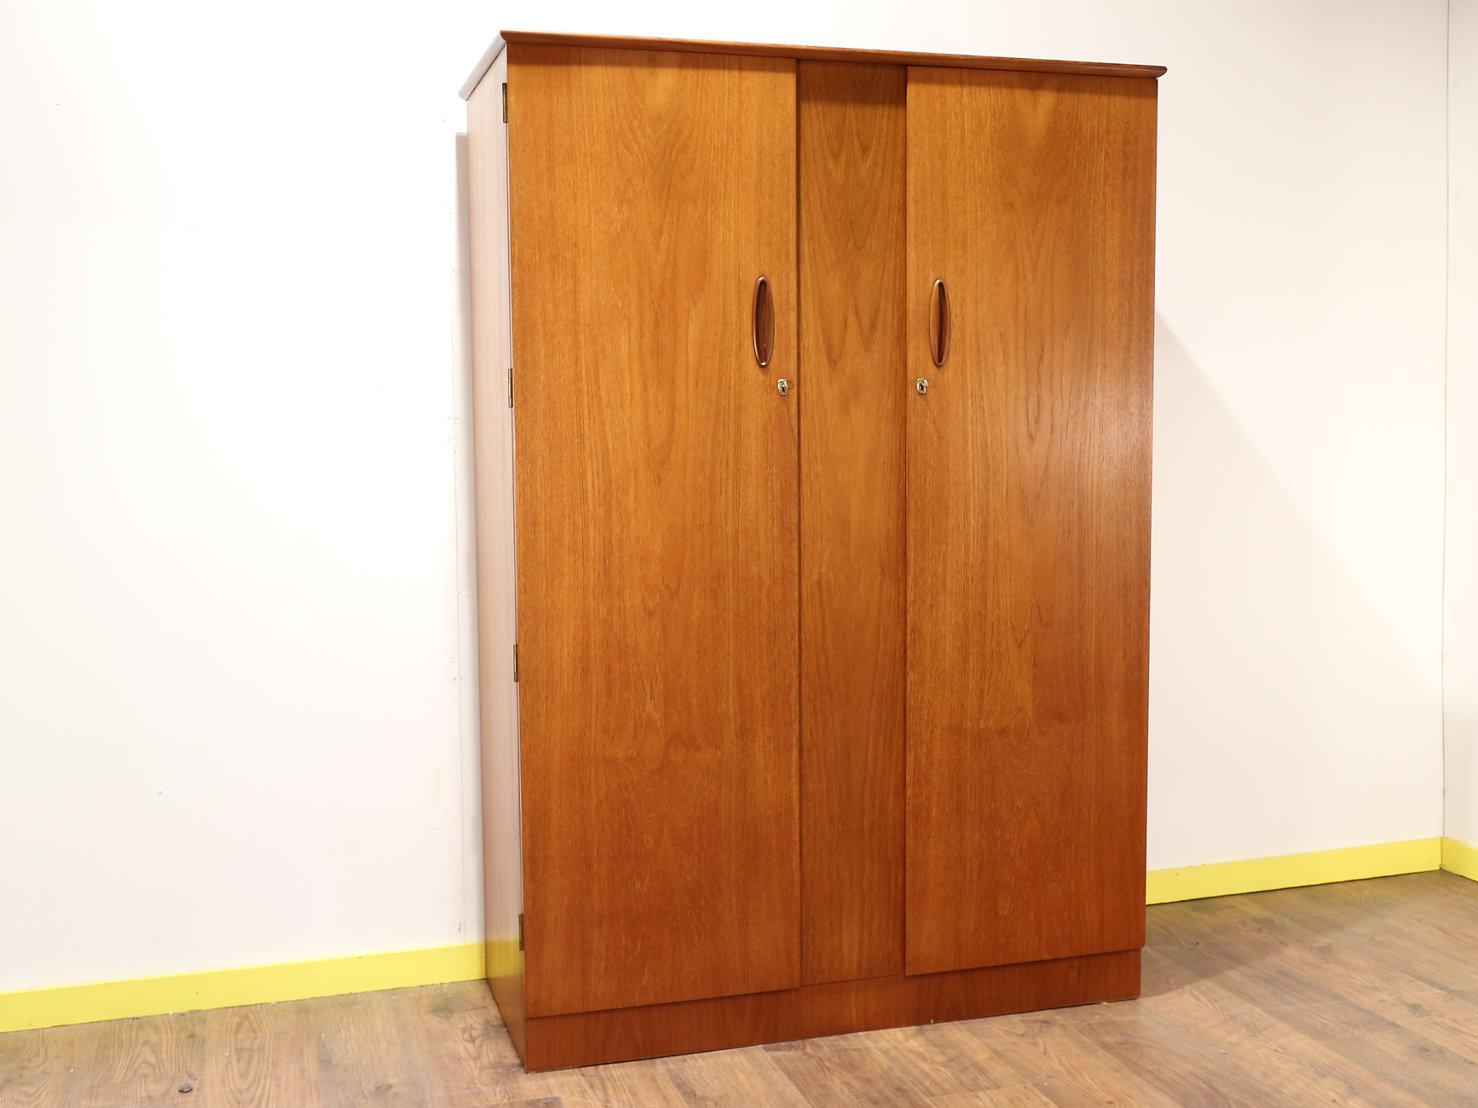 A fantastic Mid-Century Modern armoire by British furniture maker Homeworthy from the 1960s. A great storage space with hanging rail this wardrobe would look great in any bedroom 

 

Dimensions 

w48.5 d21.5 h70 

 

Condition

